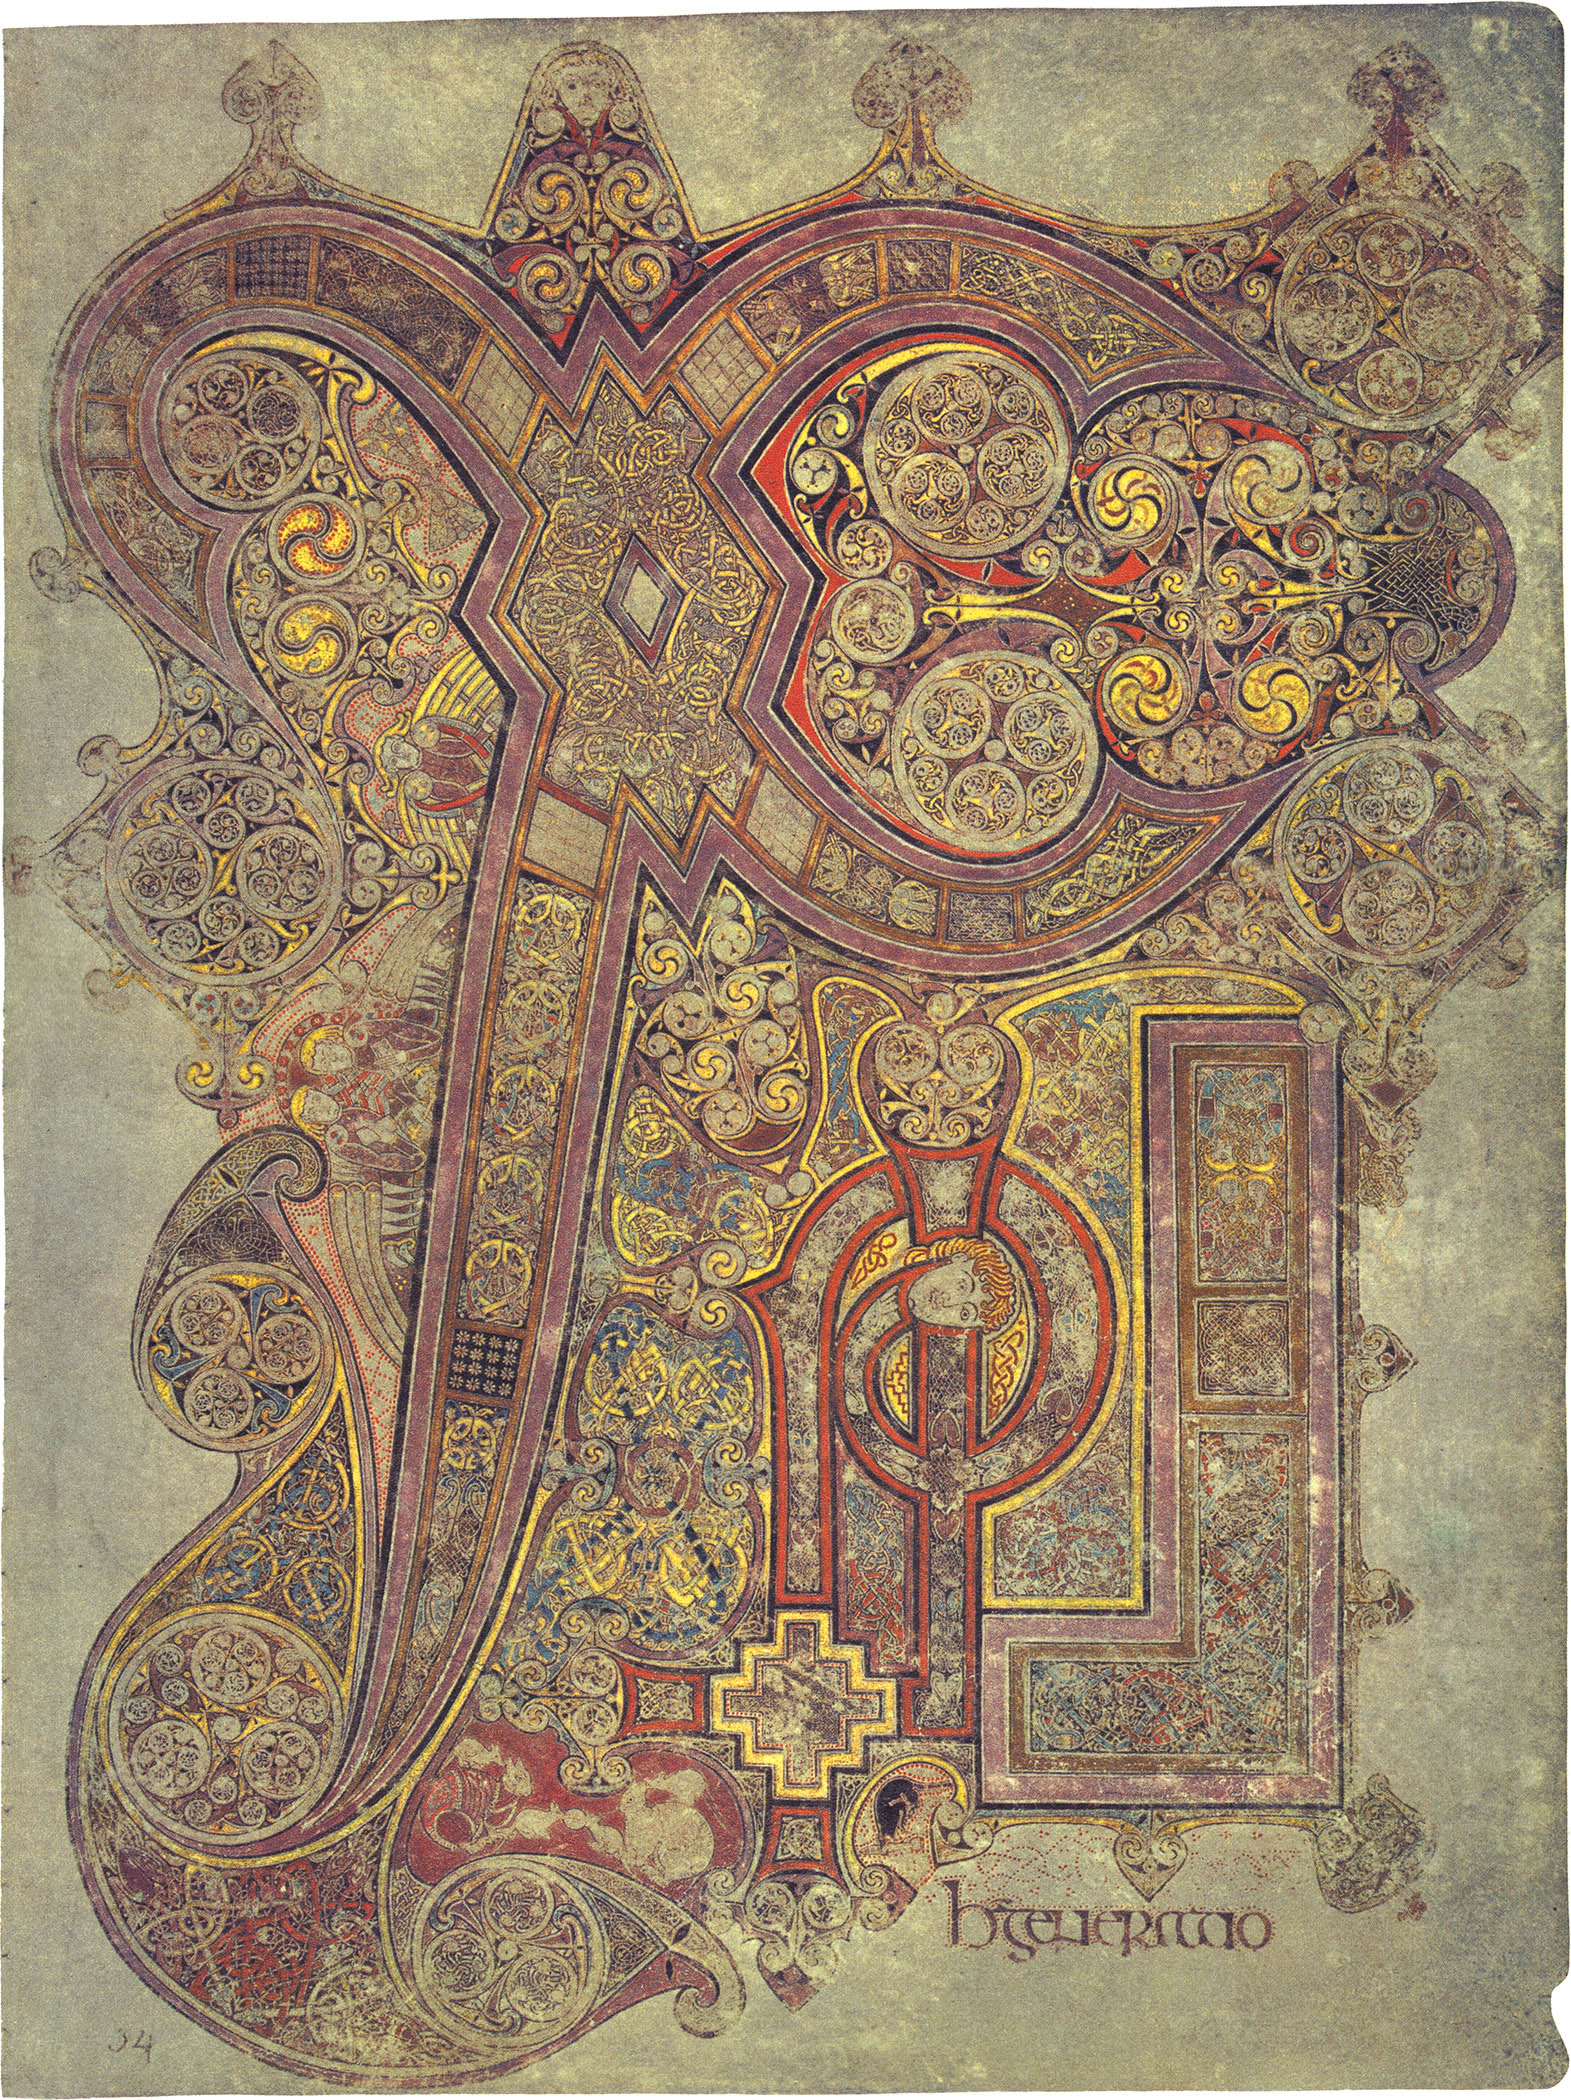 Designs from the Book of Kells by Judy Balchin